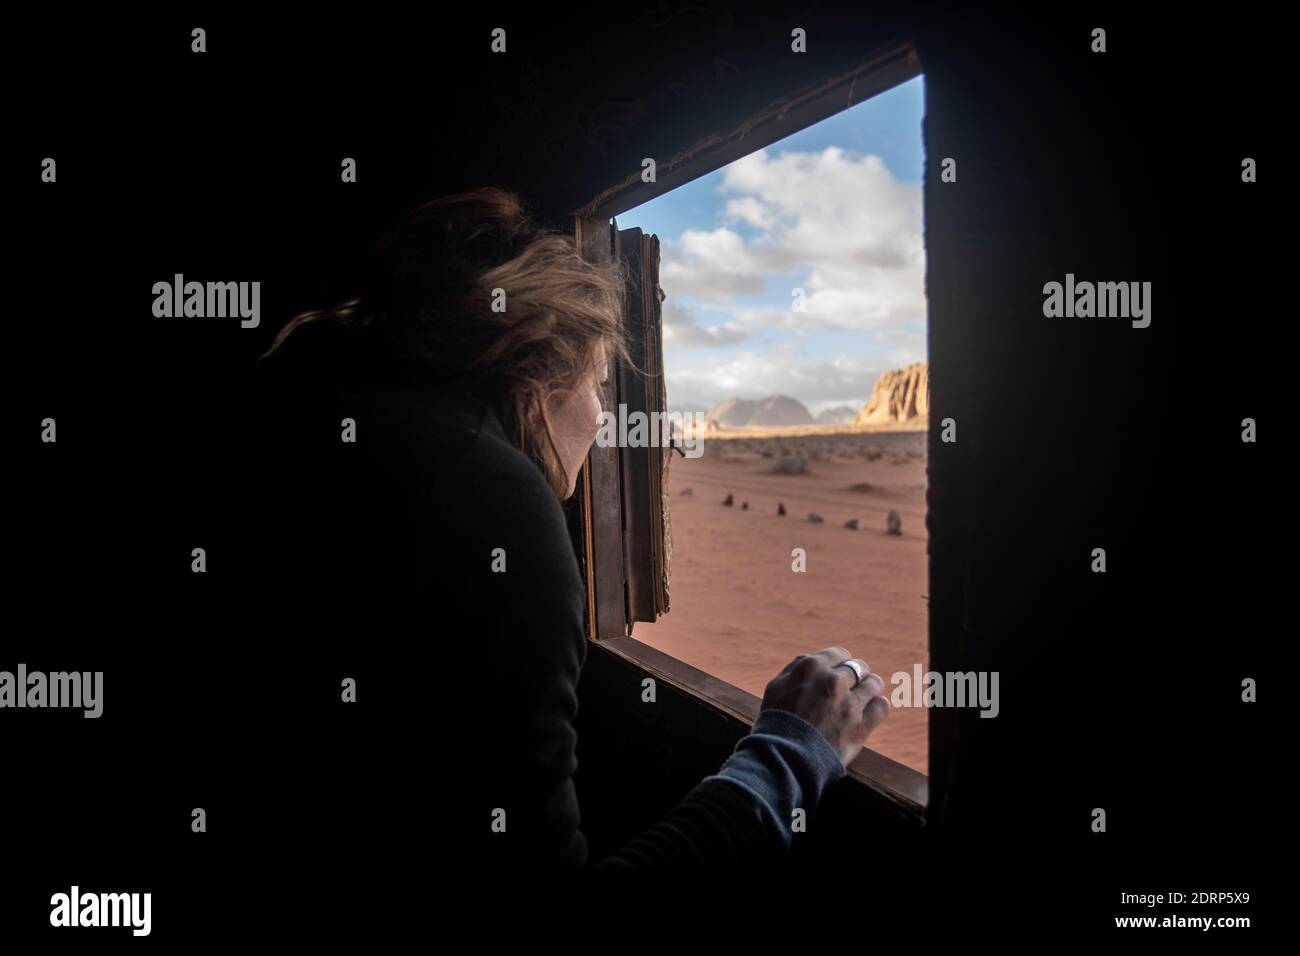 A turist is looking out the window of her small tent in Wadi Rum Desert, Jordan, feb 2020, few weeks before the global lockdown. Stock Photo